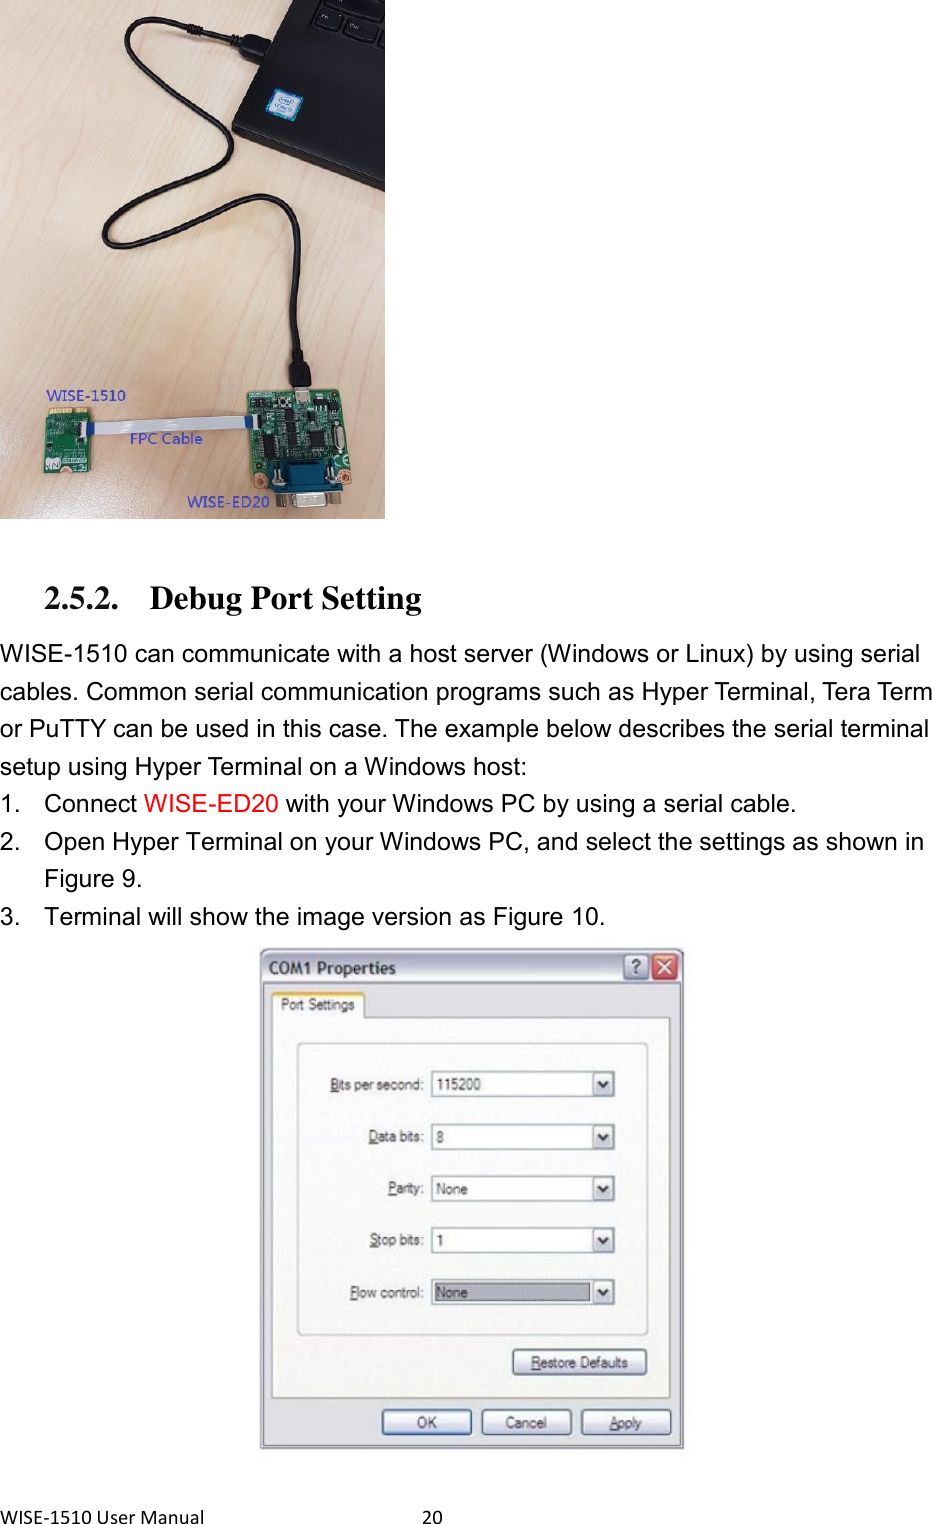 WISE-1510 User Manual  20   2.5.2. Debug Port Setting  WISE-1510 can communicate with a host server (Windows or Linux) by using serial cables. Common serial communication programs such as Hyper Terminal, Tera Term or PuTTY can be used in this case. The example below describes the serial terminal setup using Hyper Terminal on a Windows host: 1.  Connect WISE-ED20 with your Windows PC by using a serial cable. 2.  Open Hyper Terminal on your Windows PC, and select the settings as shown in Figure 9. 3.  Terminal will show the image version as Figure 10.  